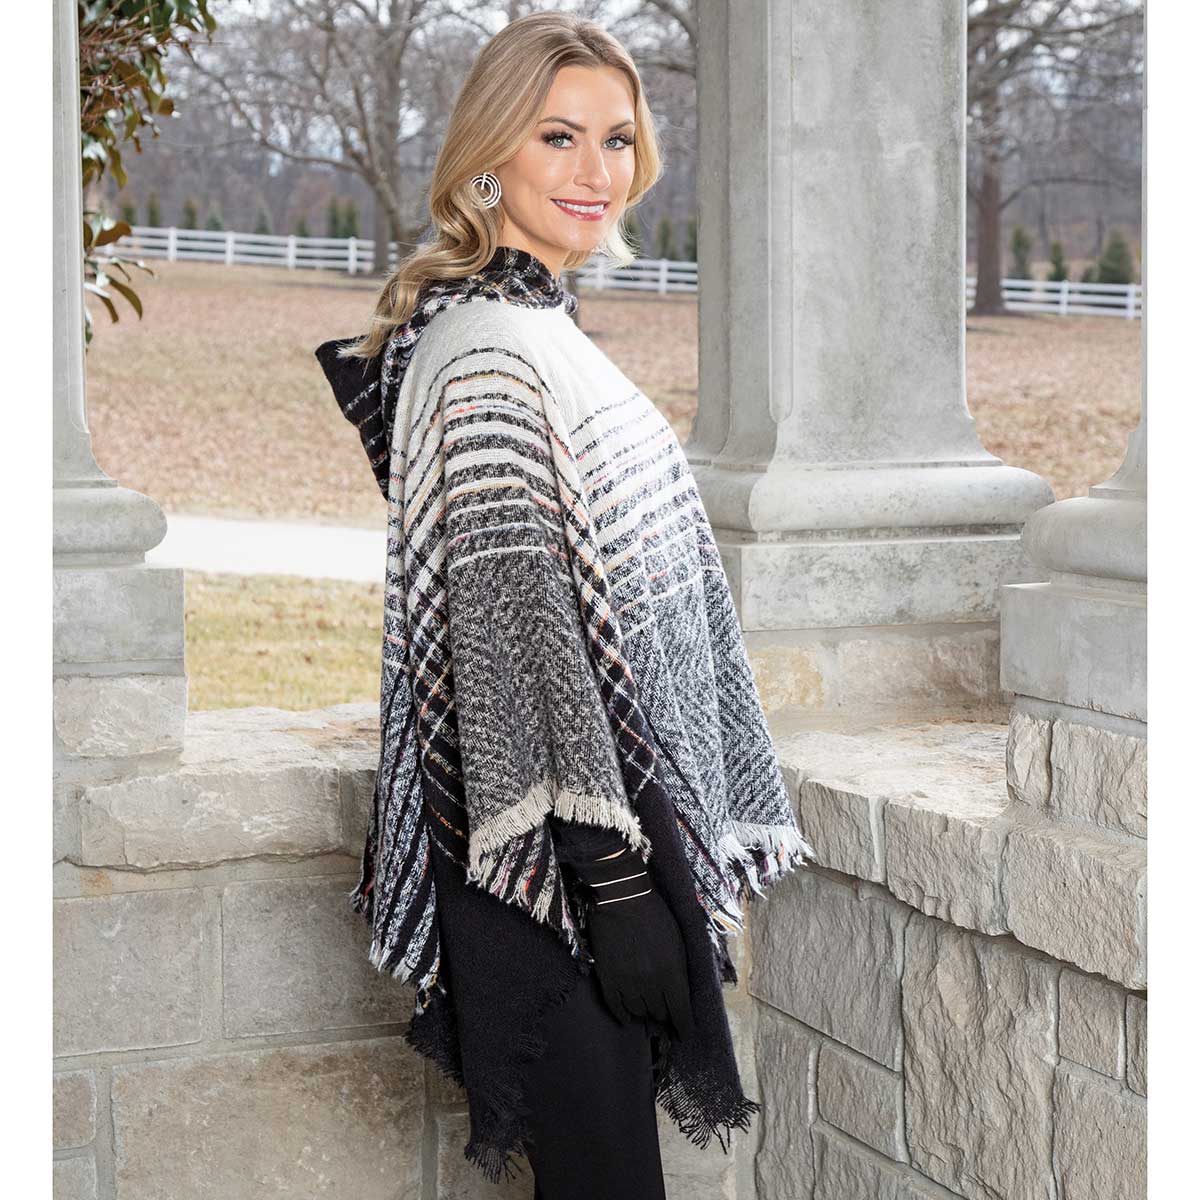 PONCHO WITH HOOD BLACK/CREAM 53IN X 27IN